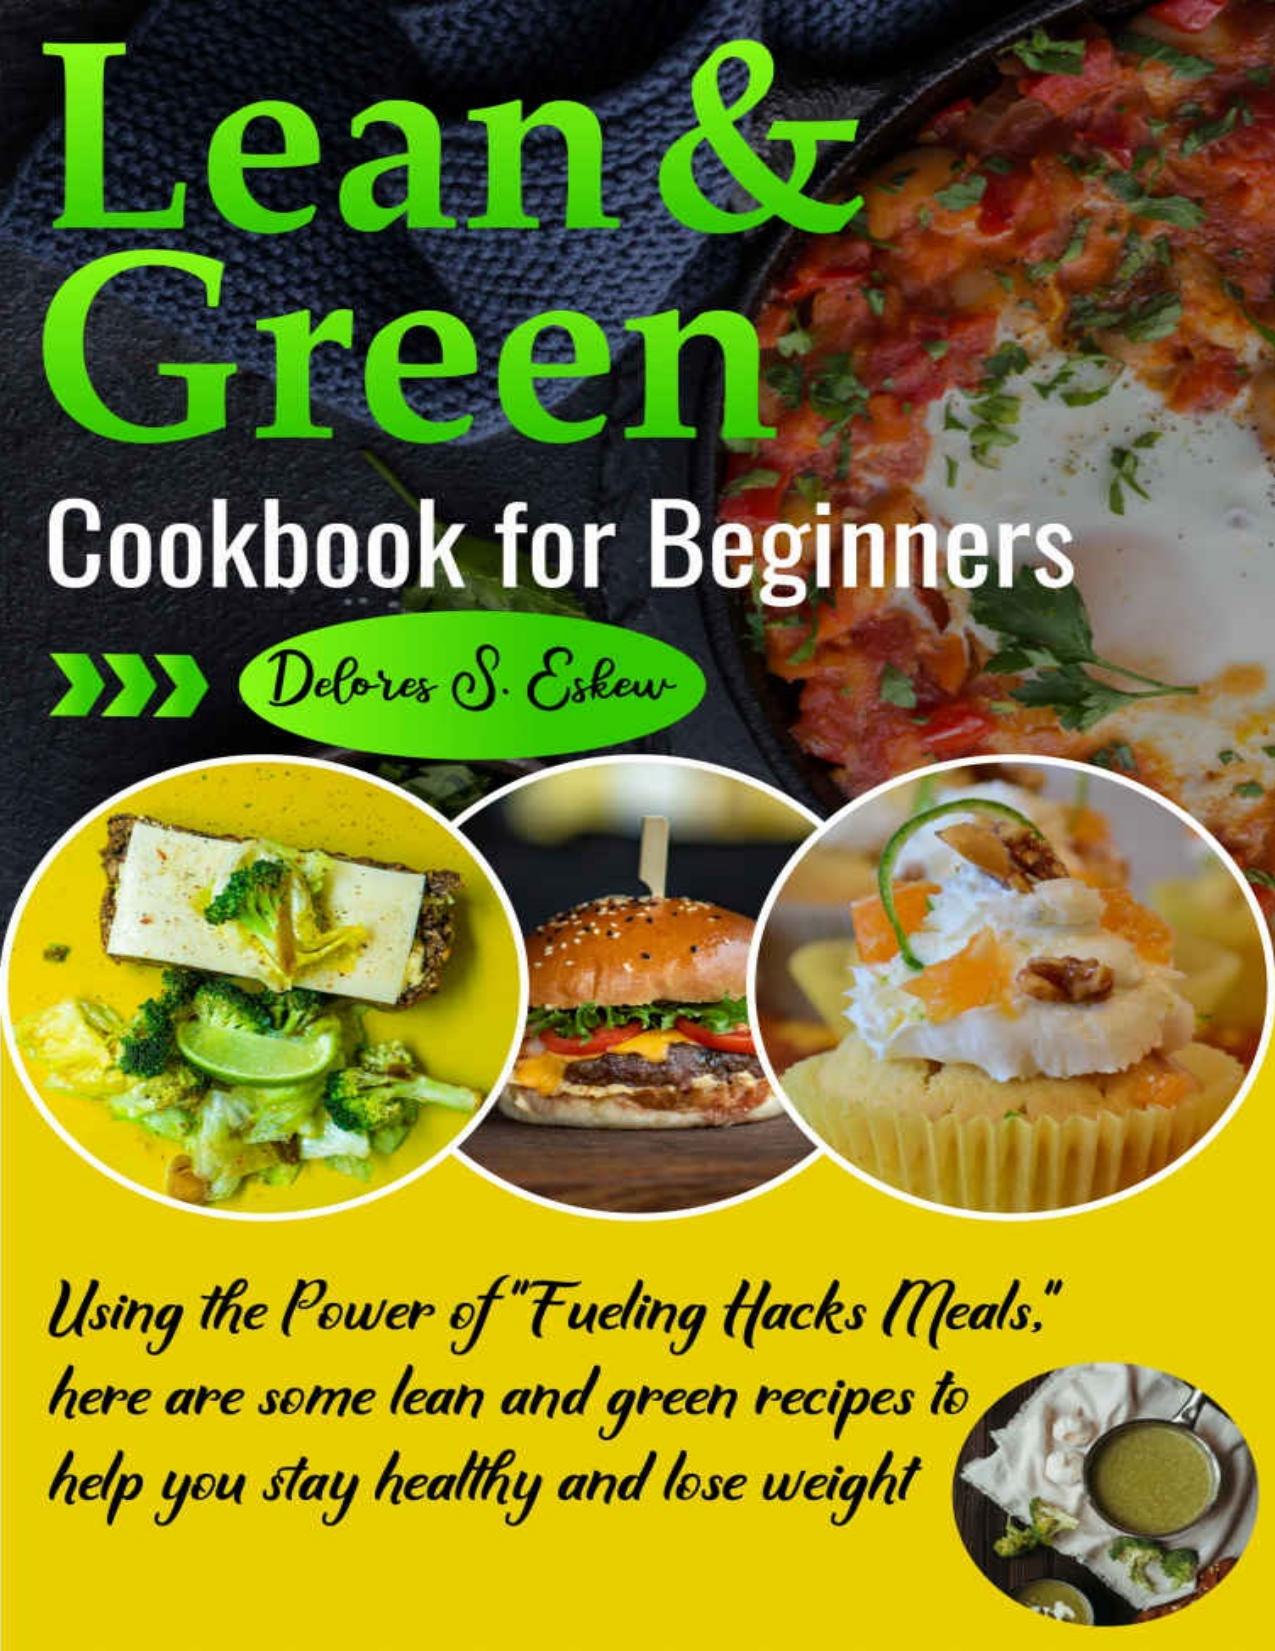 Lean and Green Cookbook for Beginners: Using the Power of "Fueling Hacks Meals," here are some lean and green recipes to help you stay healthy and lose weight. by S. Eskew Delores